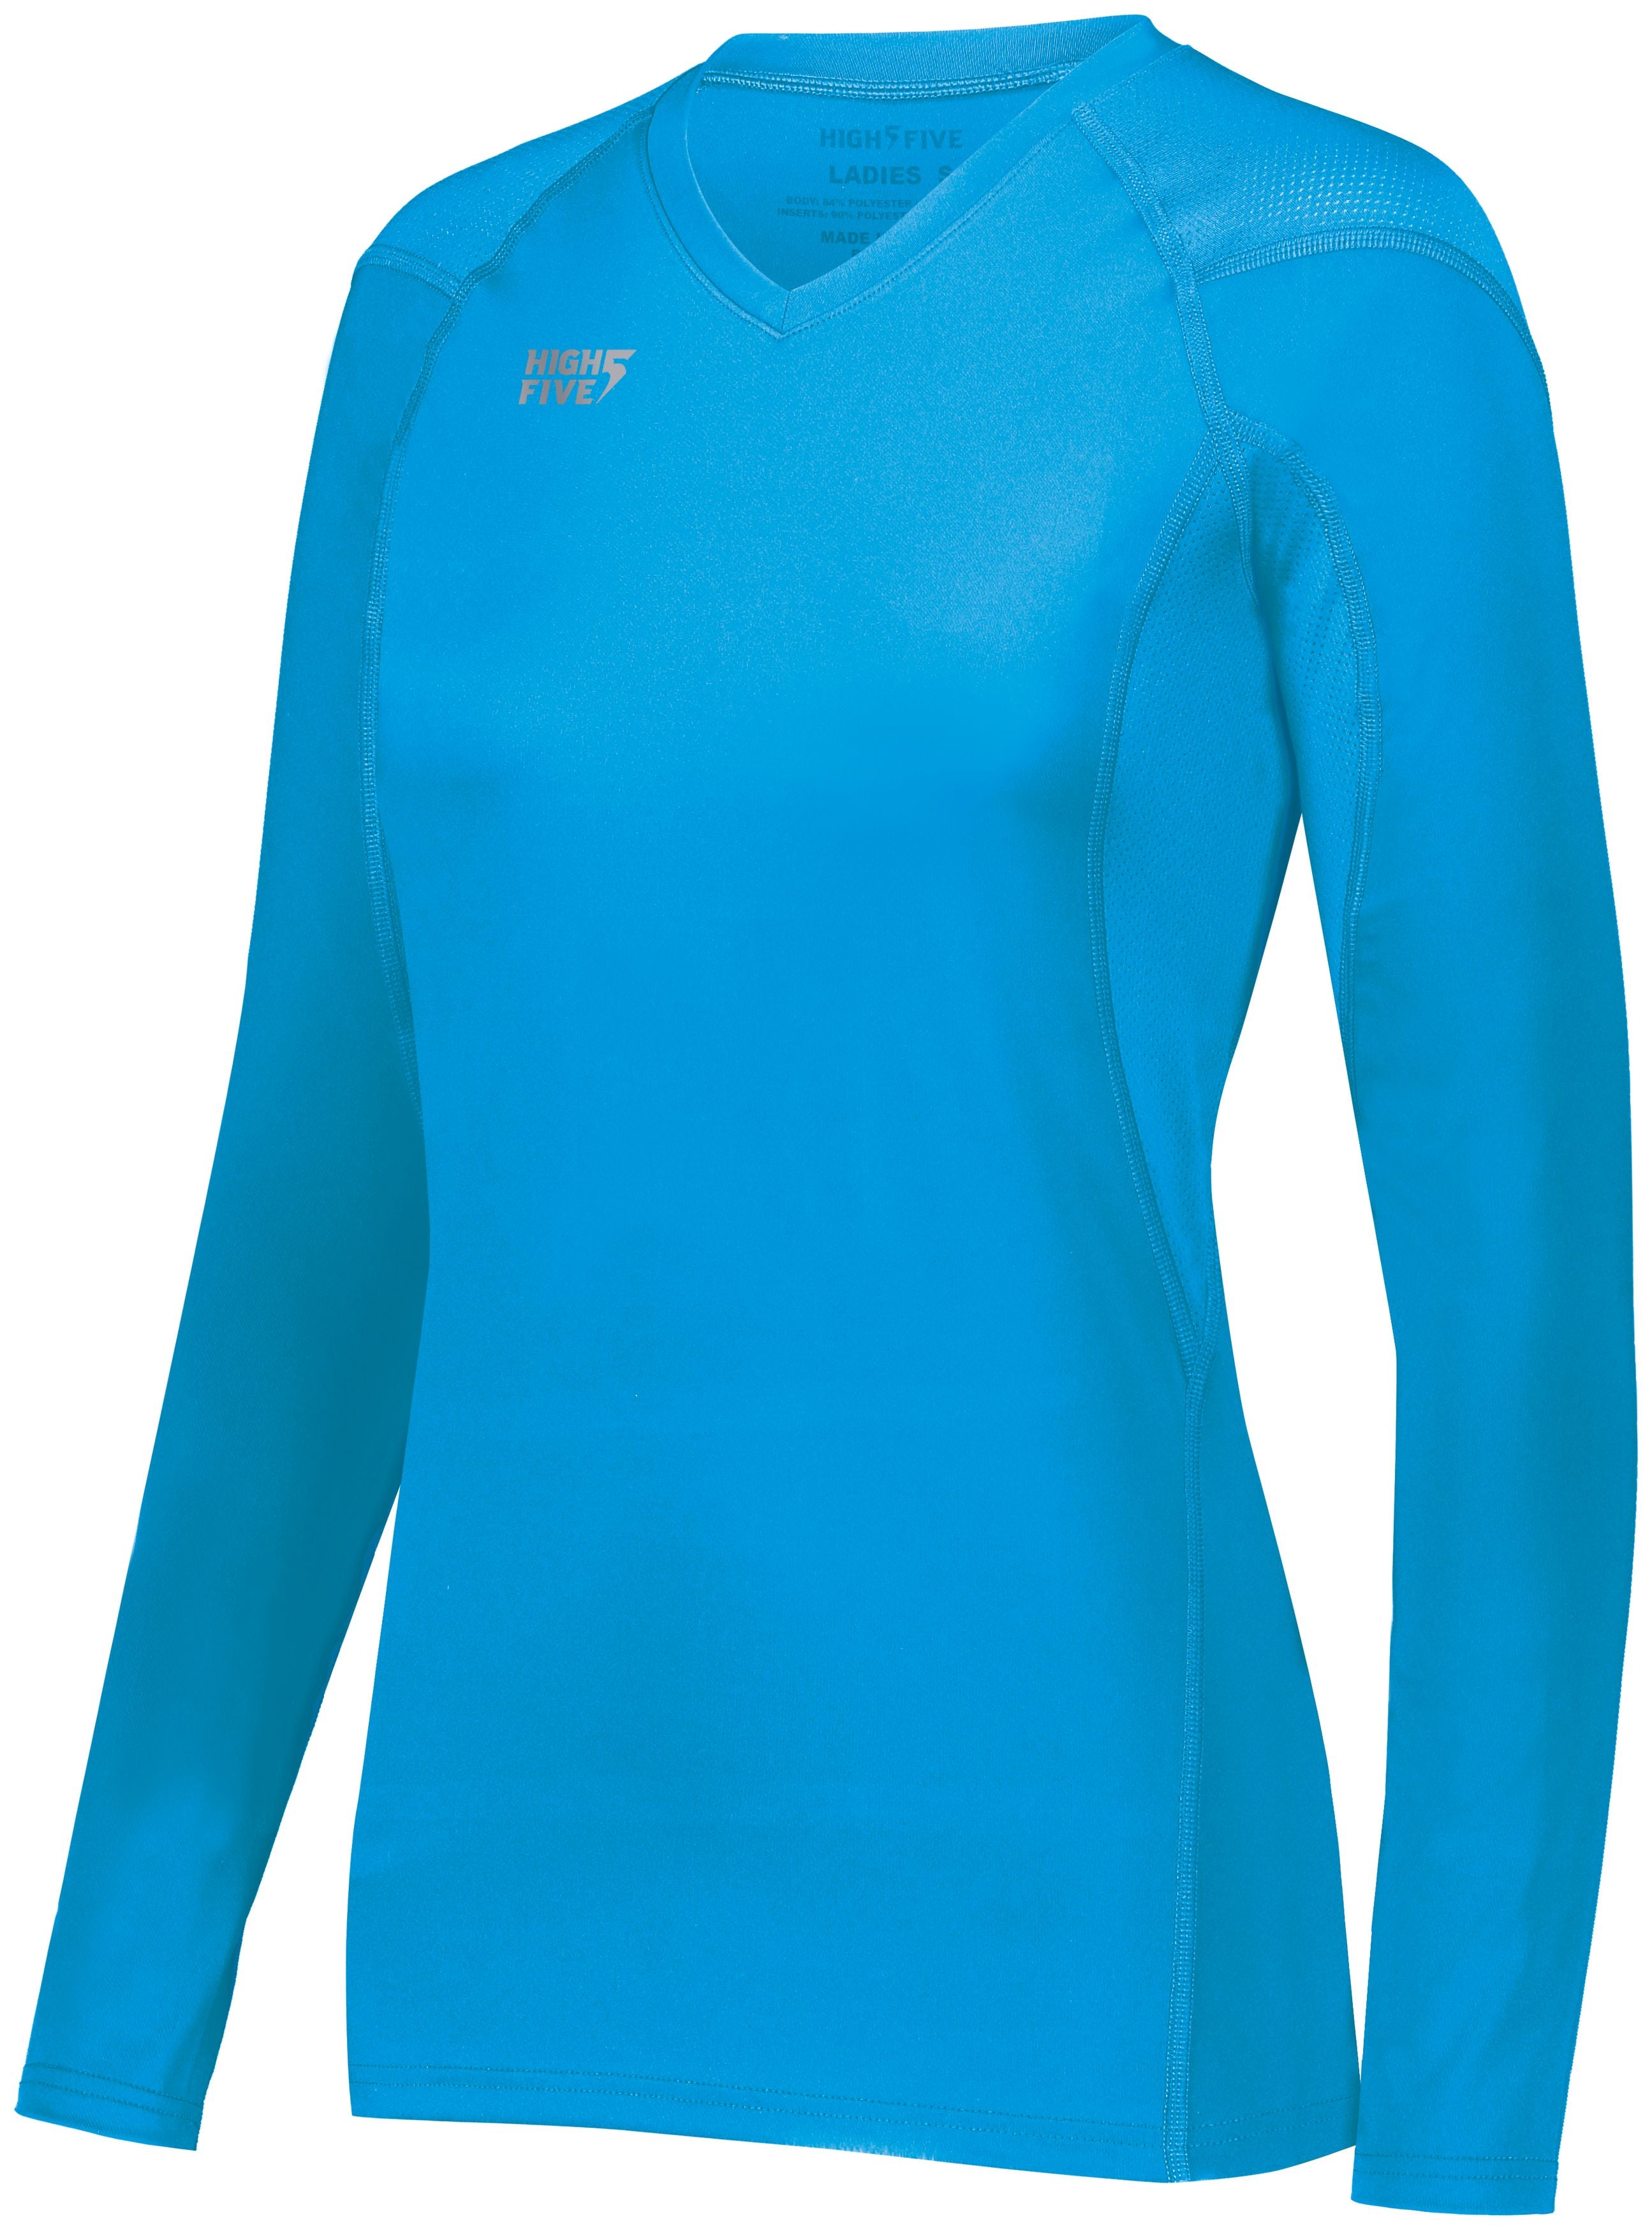 High 5 Girls Truhit Long Sleeve Jersey in Power Blue  -Part of the Girls, High5-Products, Volleyball, Girls-Jersey, Shirts product lines at KanaleyCreations.com